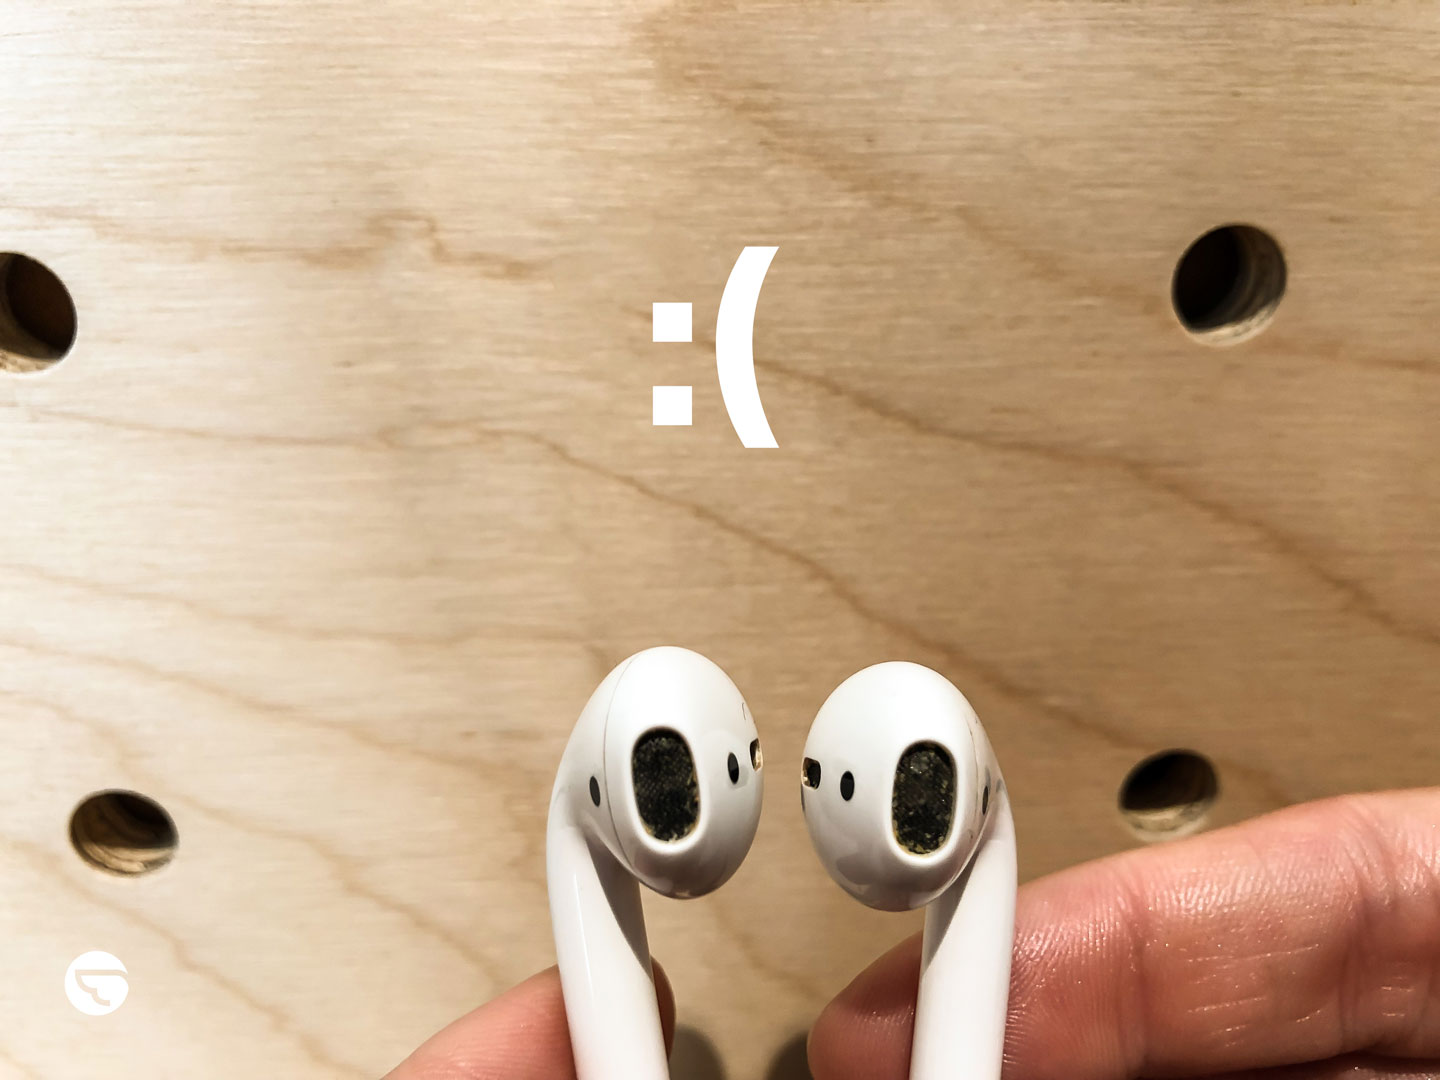 How to clean Apple Airpods | Airtasker Life Skills